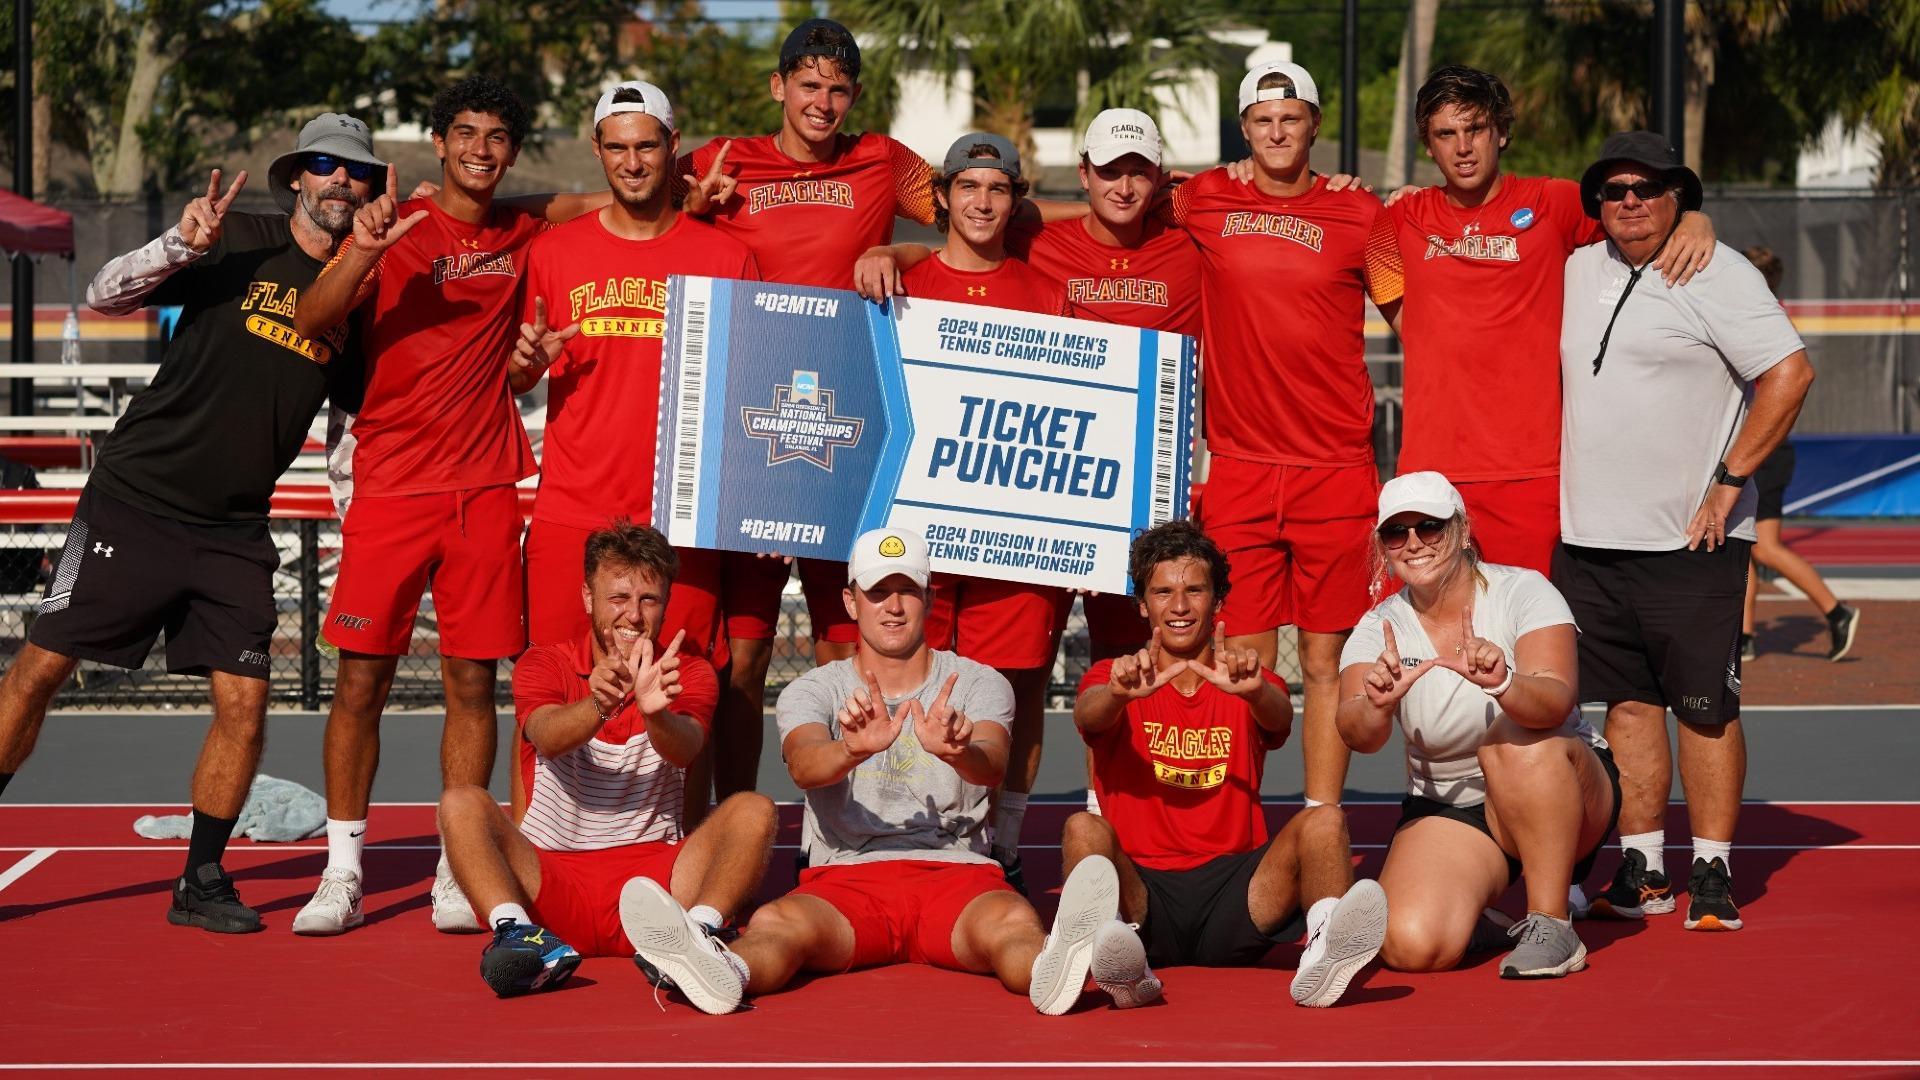 No. 2 Flagler continues on to the round of 16